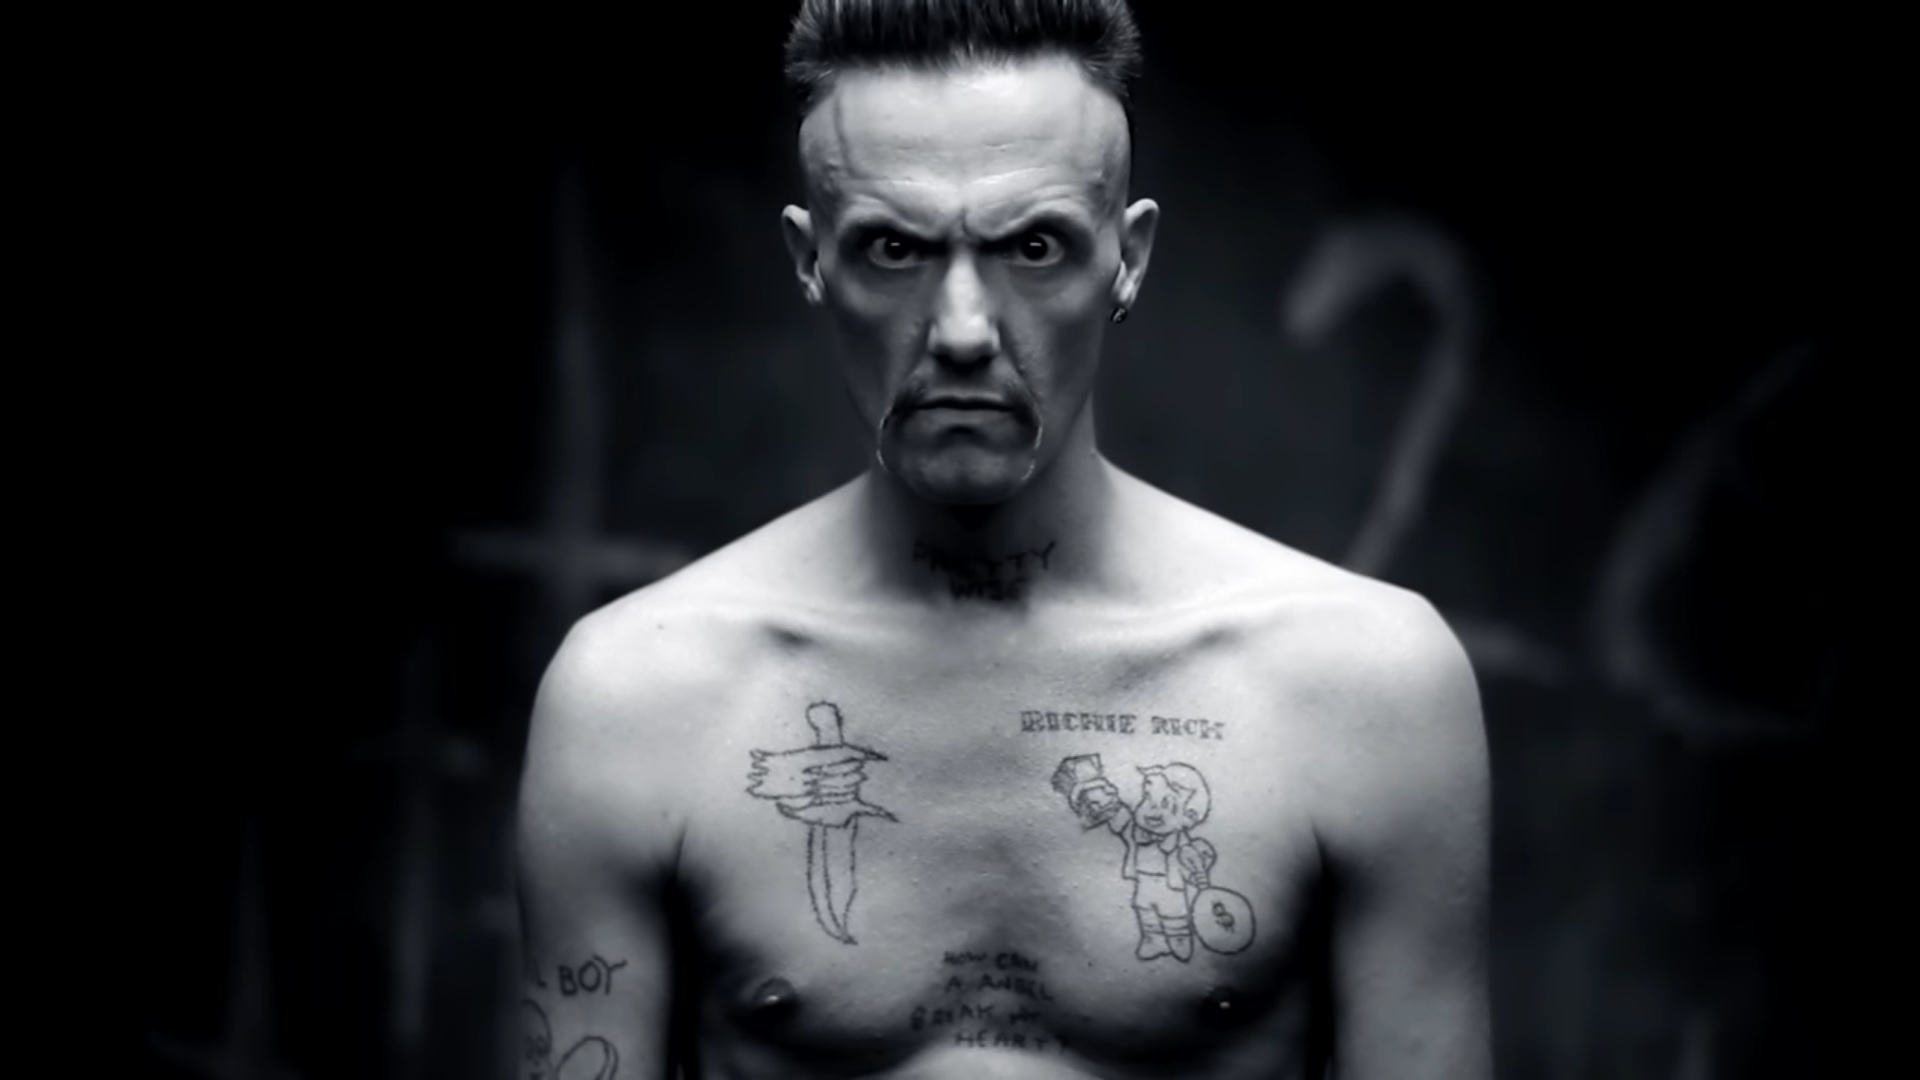 Die Antwoord: Known for their eccentric and often outrageous visual style, which is heavily influenced by South African culture. 1920x1080 Full HD Background.